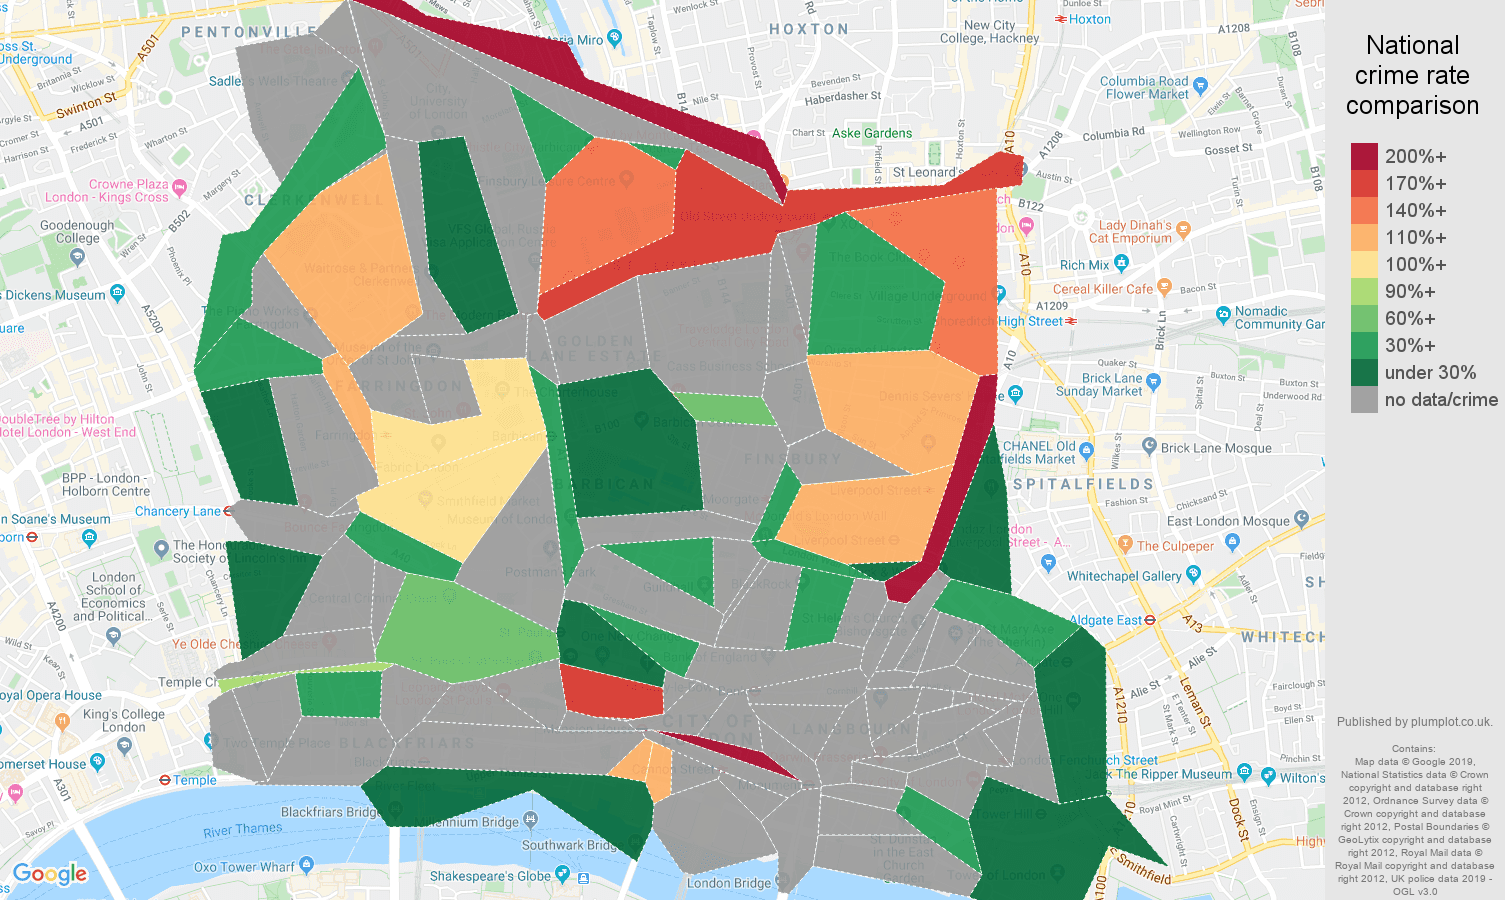 East Central London possession of weapons crime rate comparison map